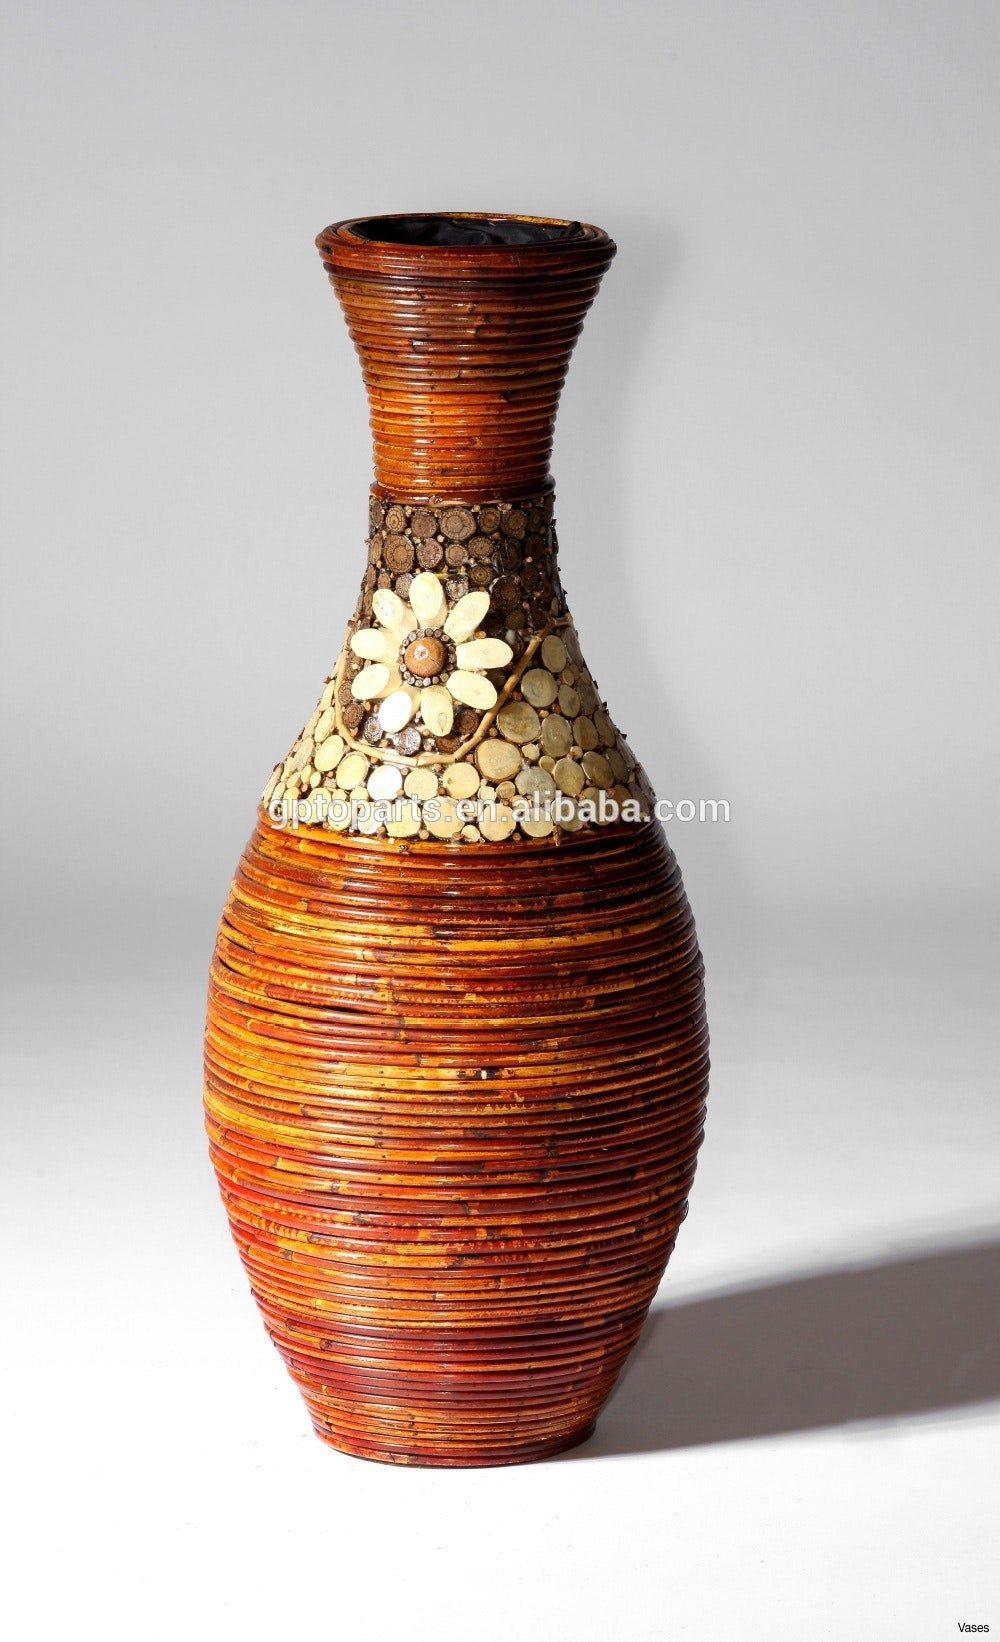 10 Perfect Tall Wooden Flower Vase 2024 free download tall wooden flower vase of vases wicker flower vase woven jungalow tall eclectic decor planter pertaining to vases wicker flower vase 80cm coarse rattan french woven pattern bottle wood ratt